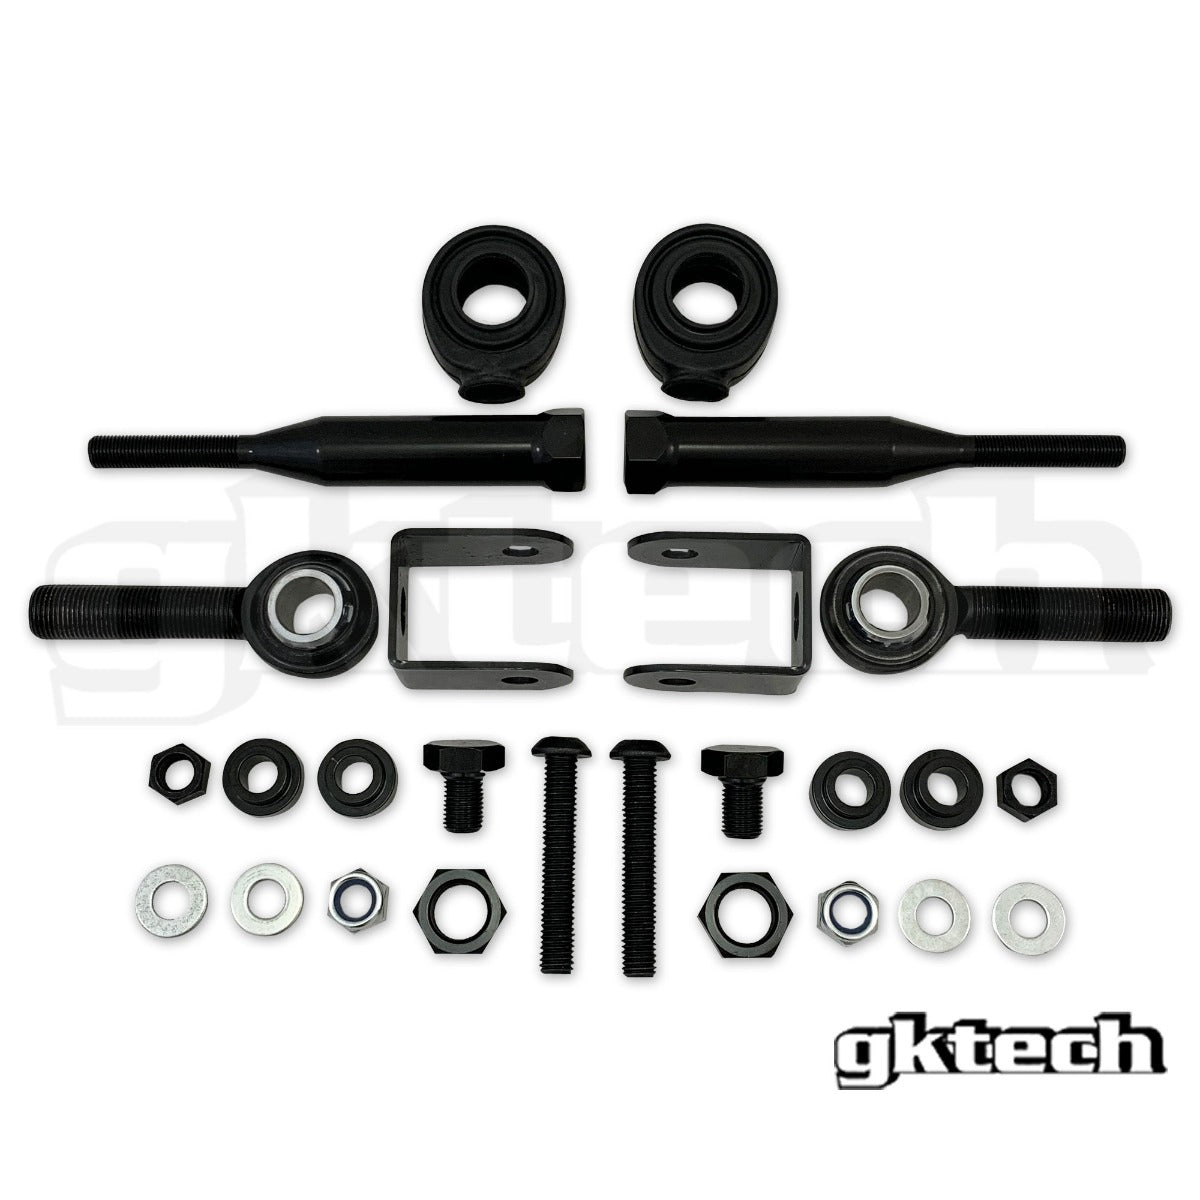 S13/180sx/R32 HICAS Tie rod Replacement Kit